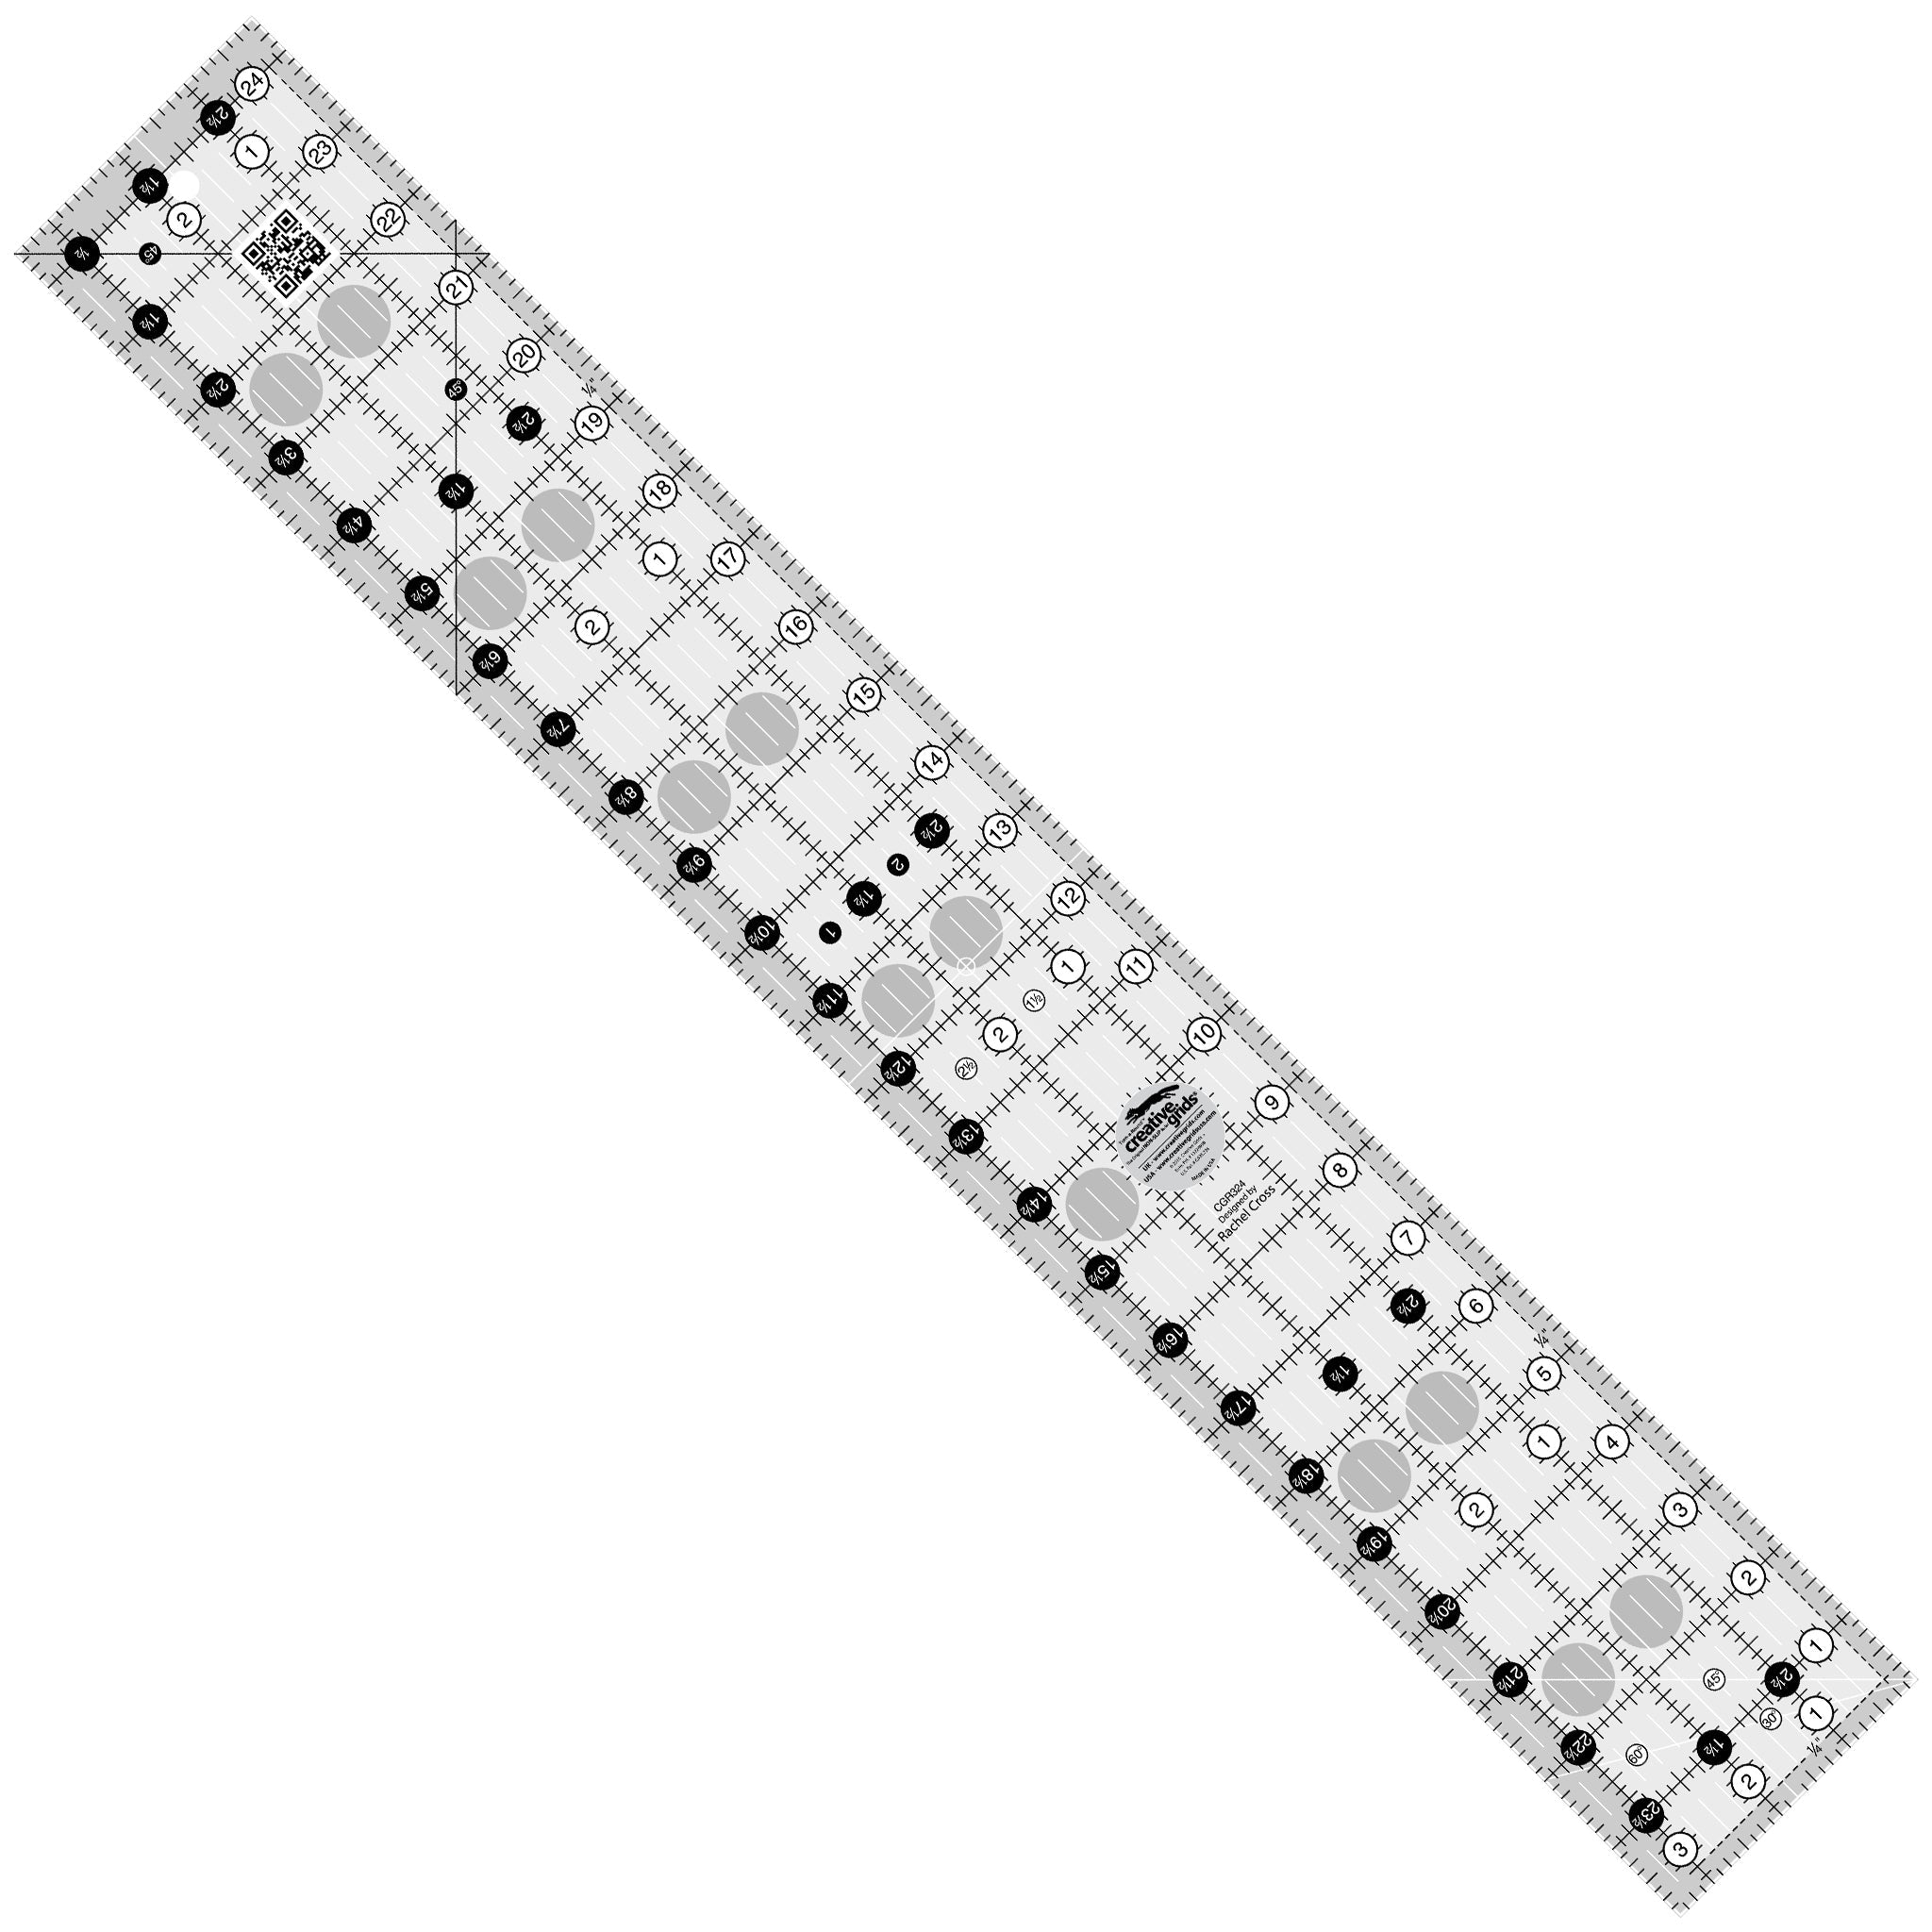 Quilt Ruler Upgrade Kit for 12, 12-1/2, 24, or 24-1/2 Inch Acrylic Rul